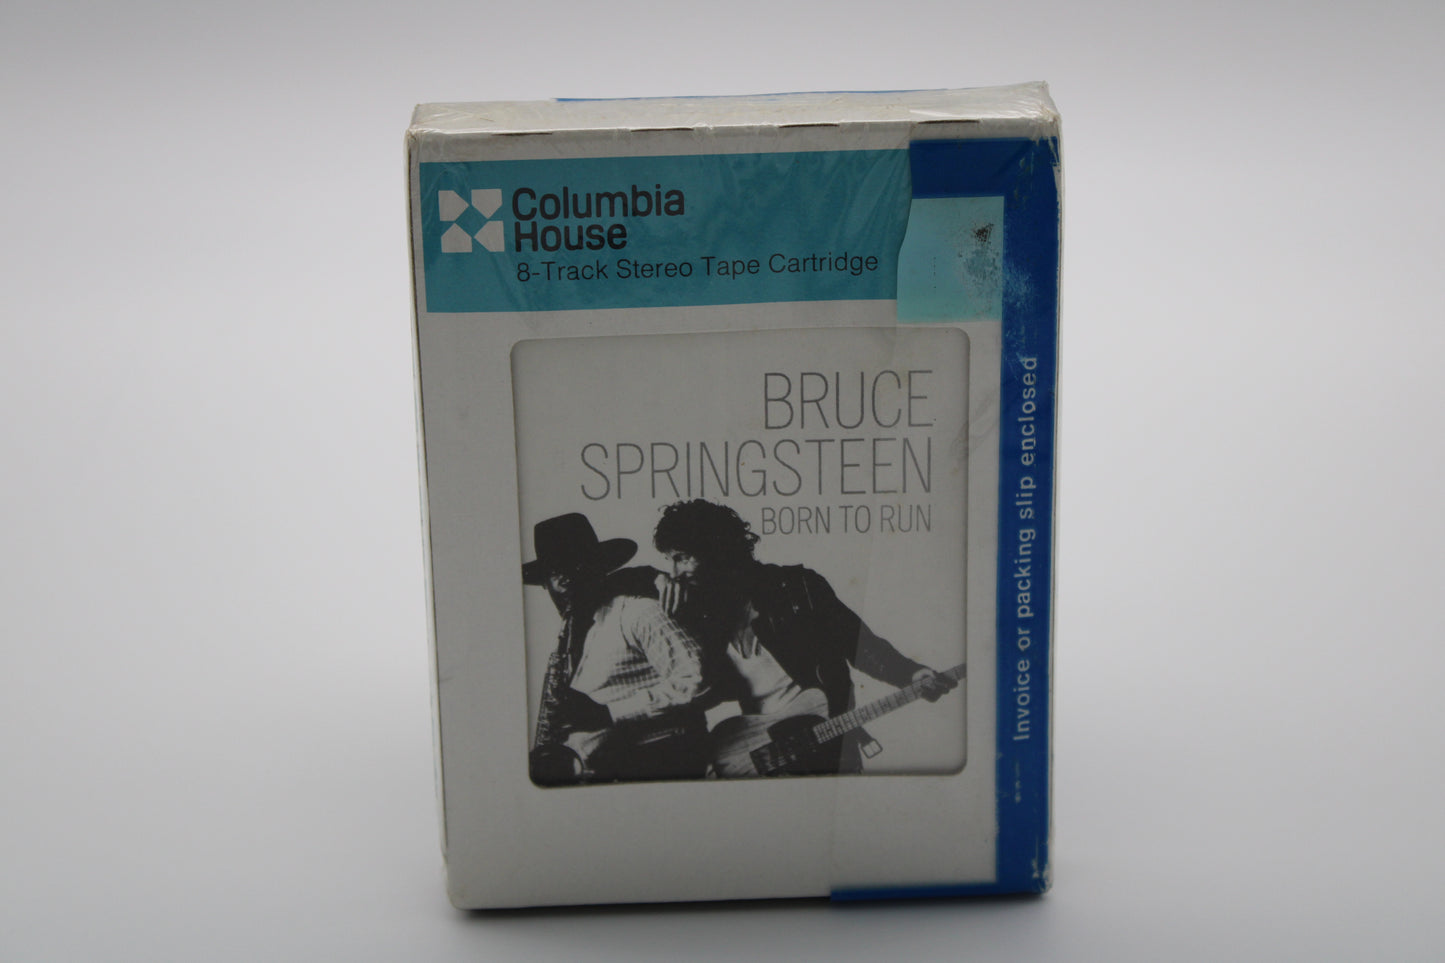 Bruce Springsteen SEALED Born to Run - Sealed 8 Track Tape Columbia Collectible